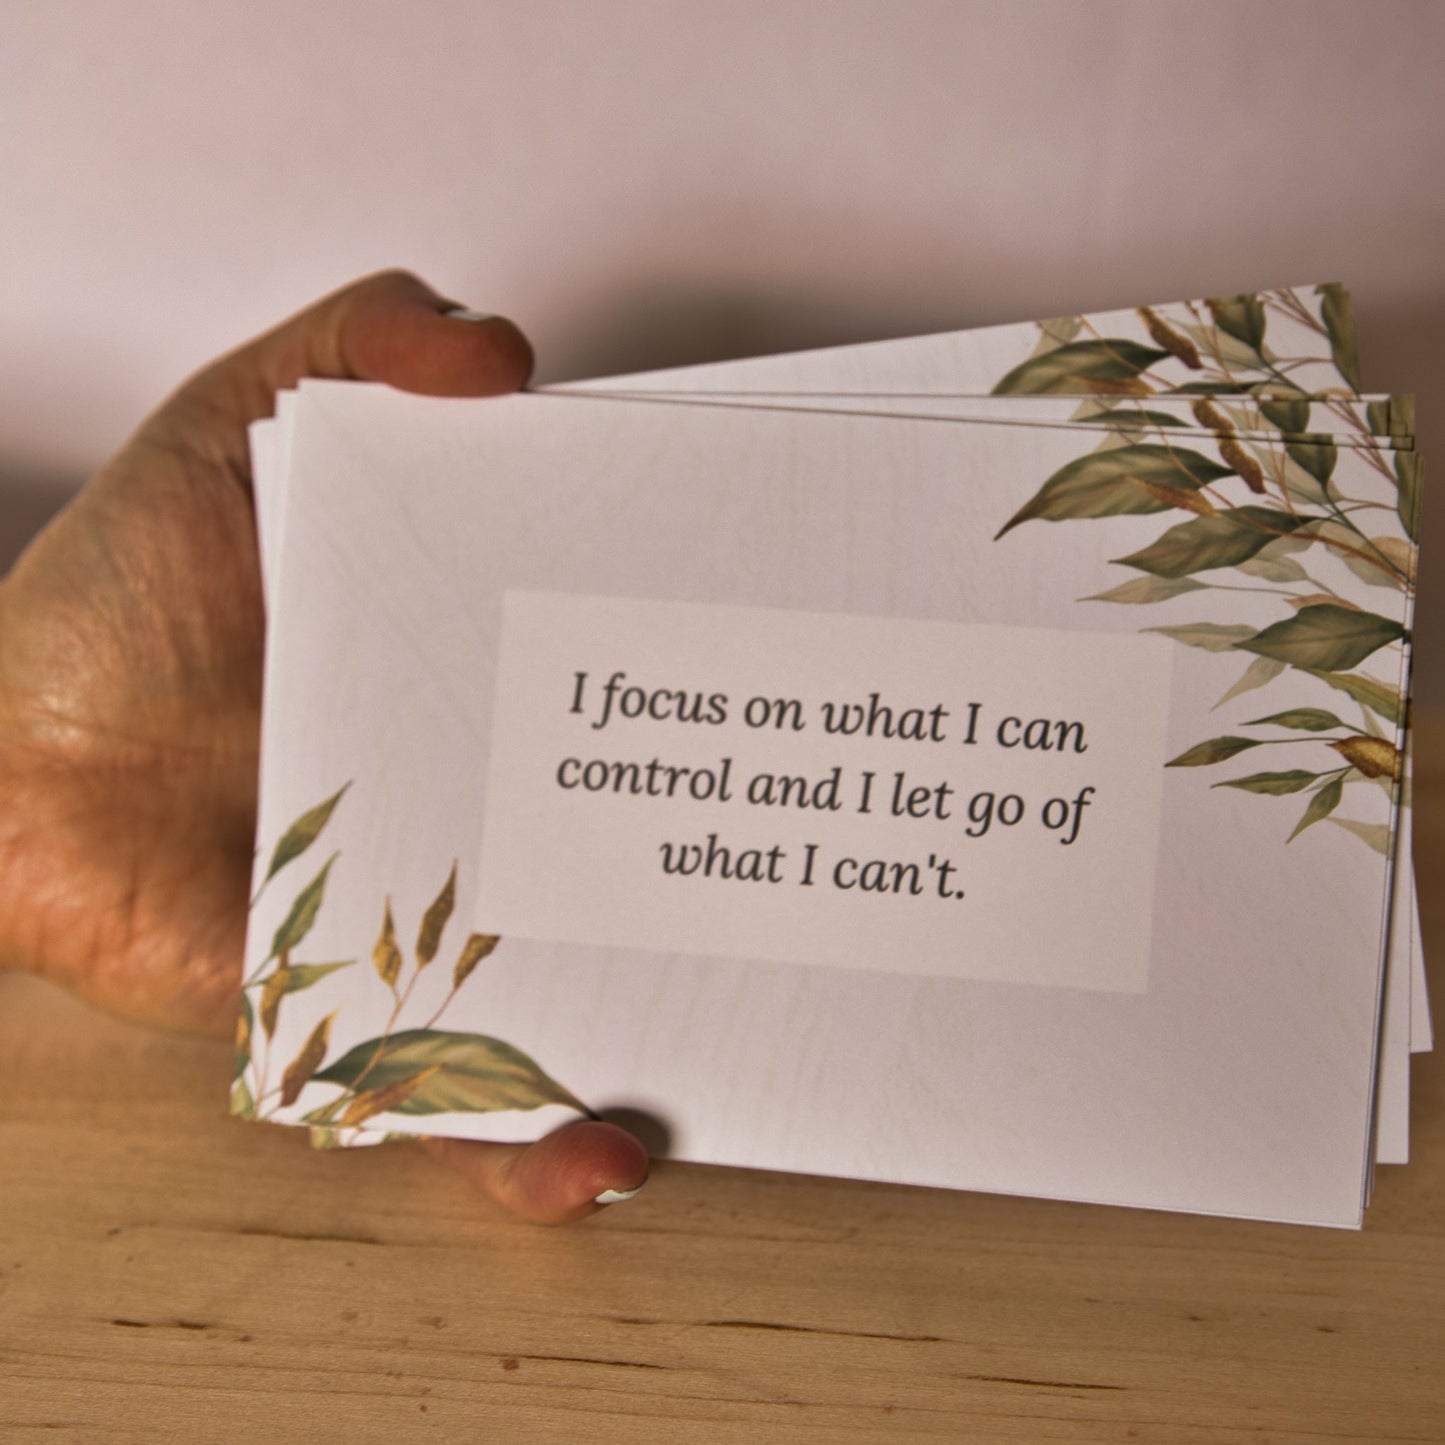 Affirmation cards held in hand to show size.